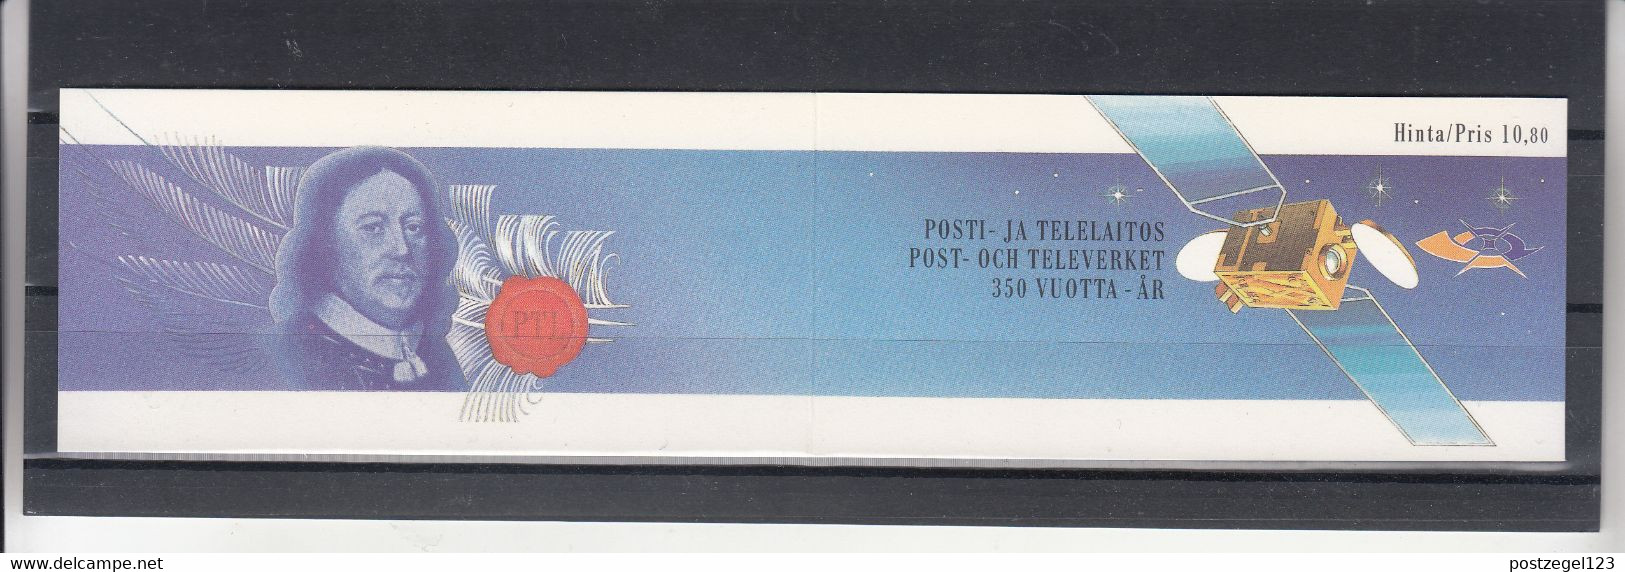 Finland / Booklet - Post